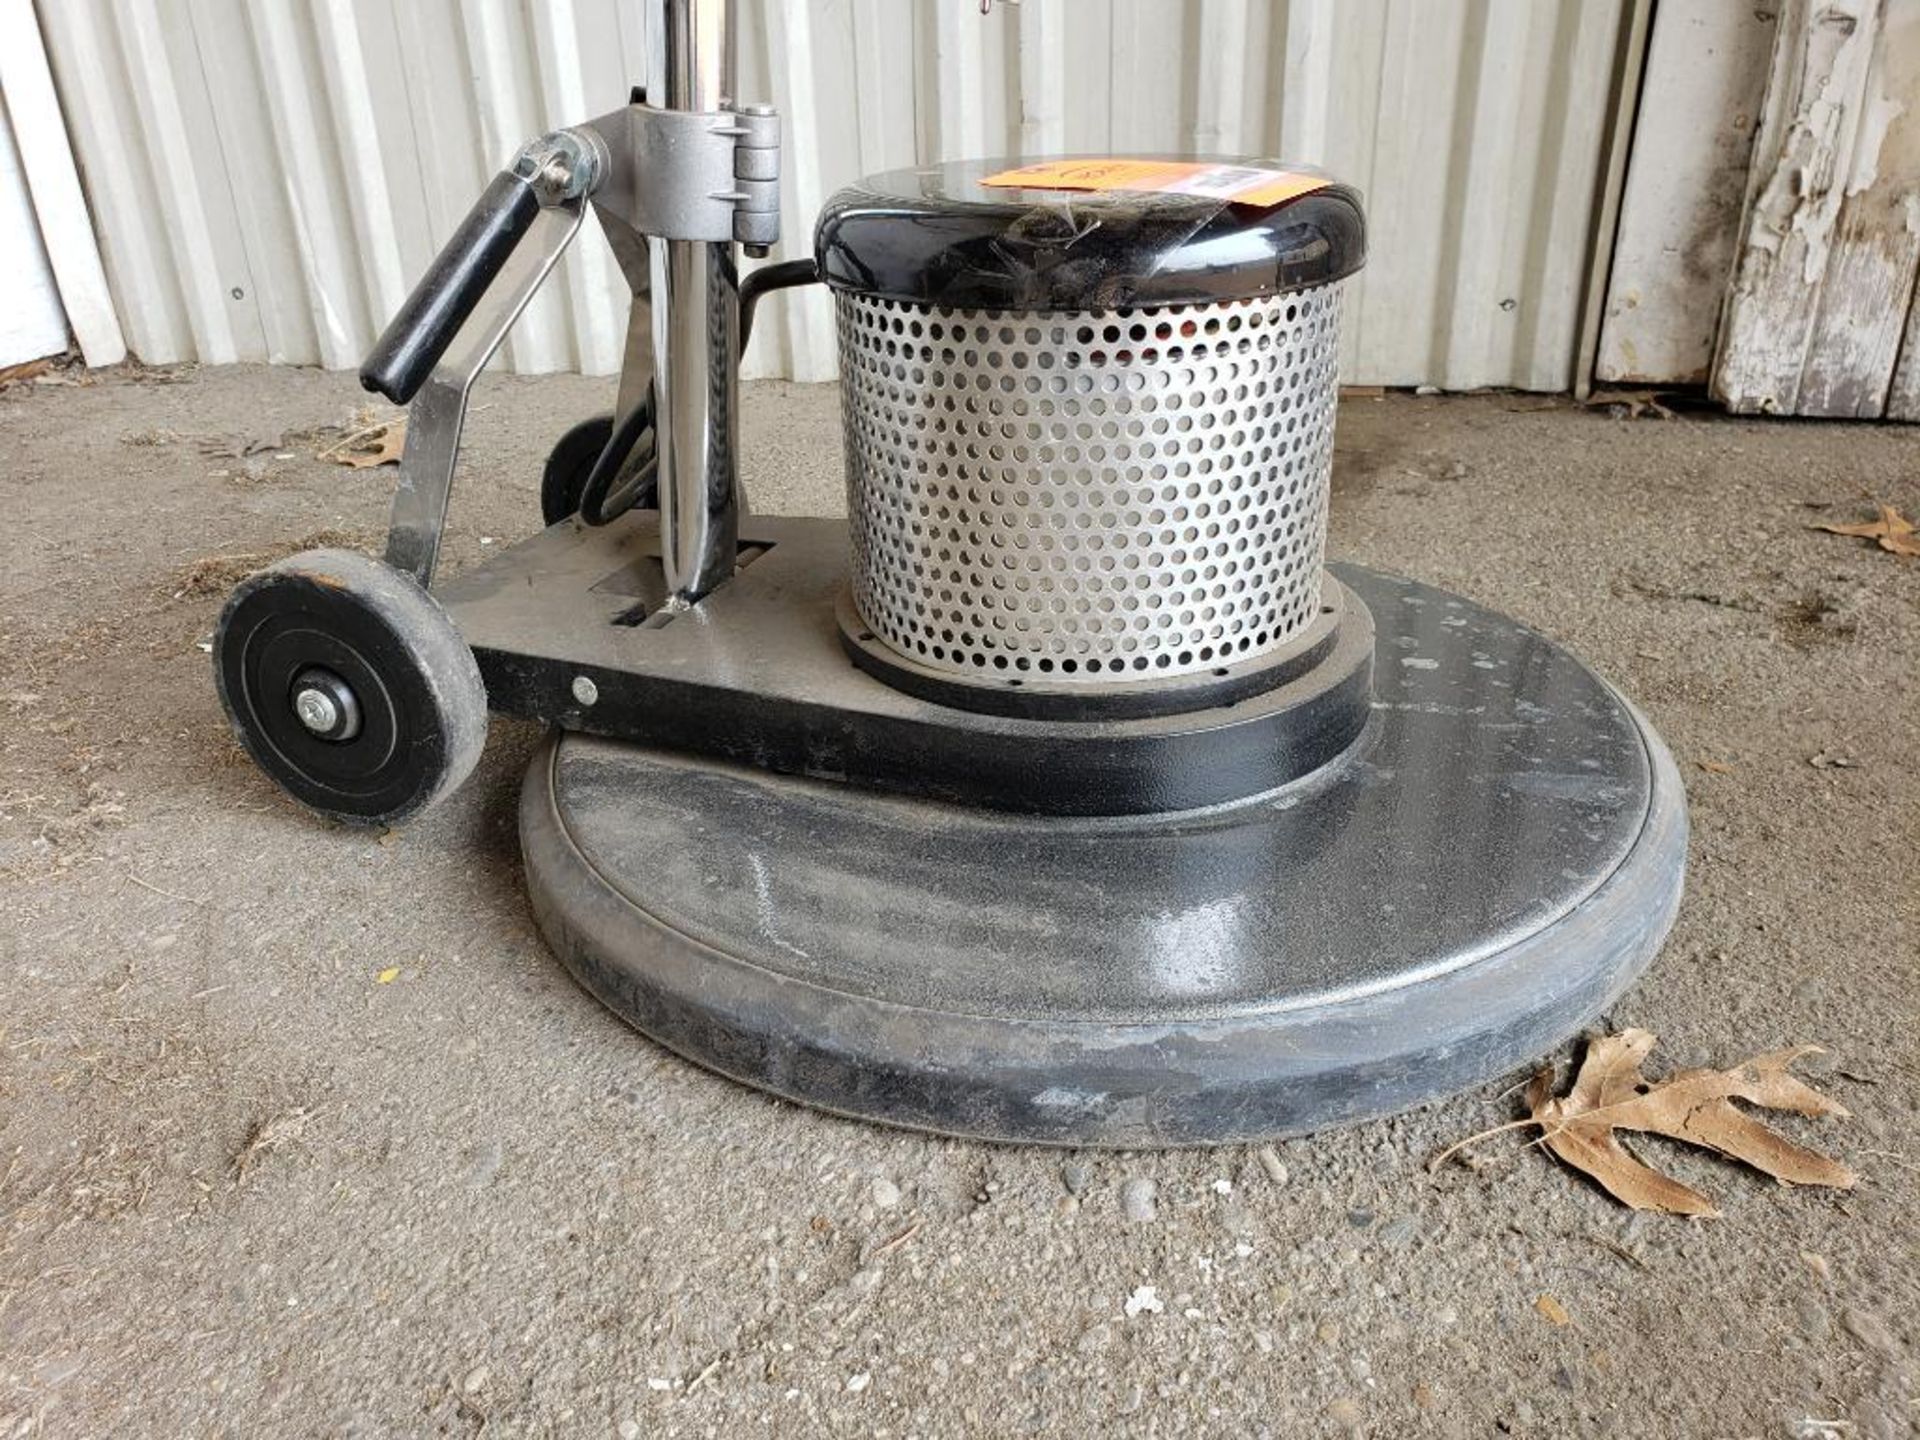 Tacony Corp. C202G floor cleaning machine. - Image 2 of 6